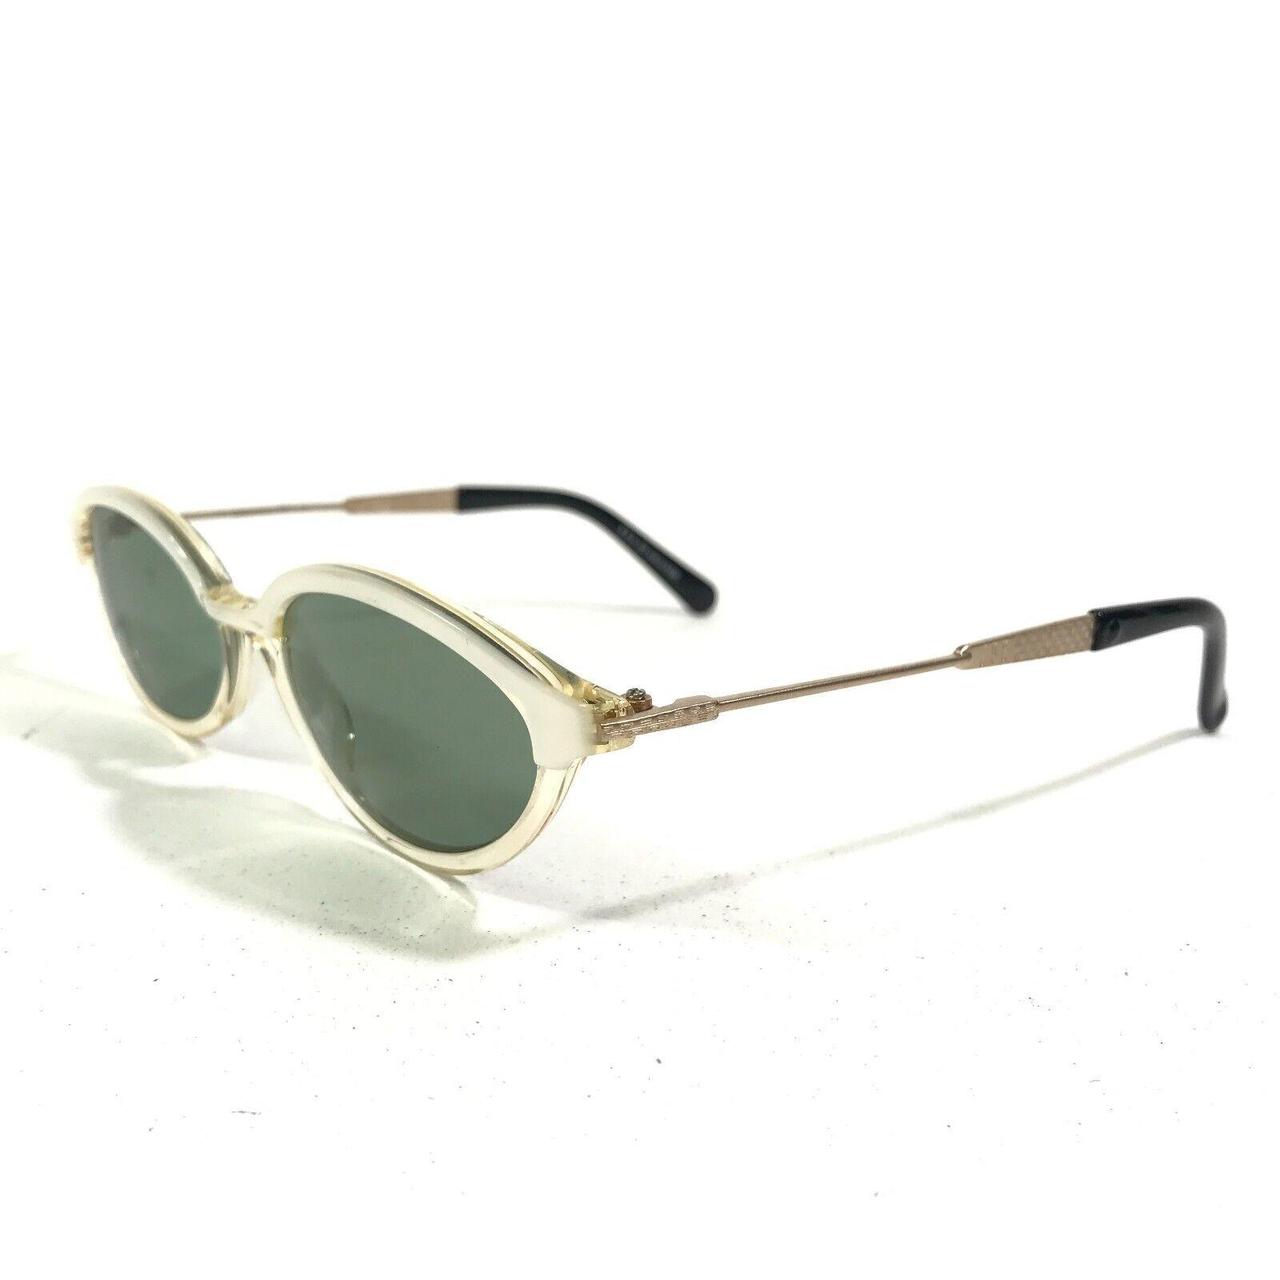 Product Image 1 - JPG by Gaultier Sunglasses 58-0016